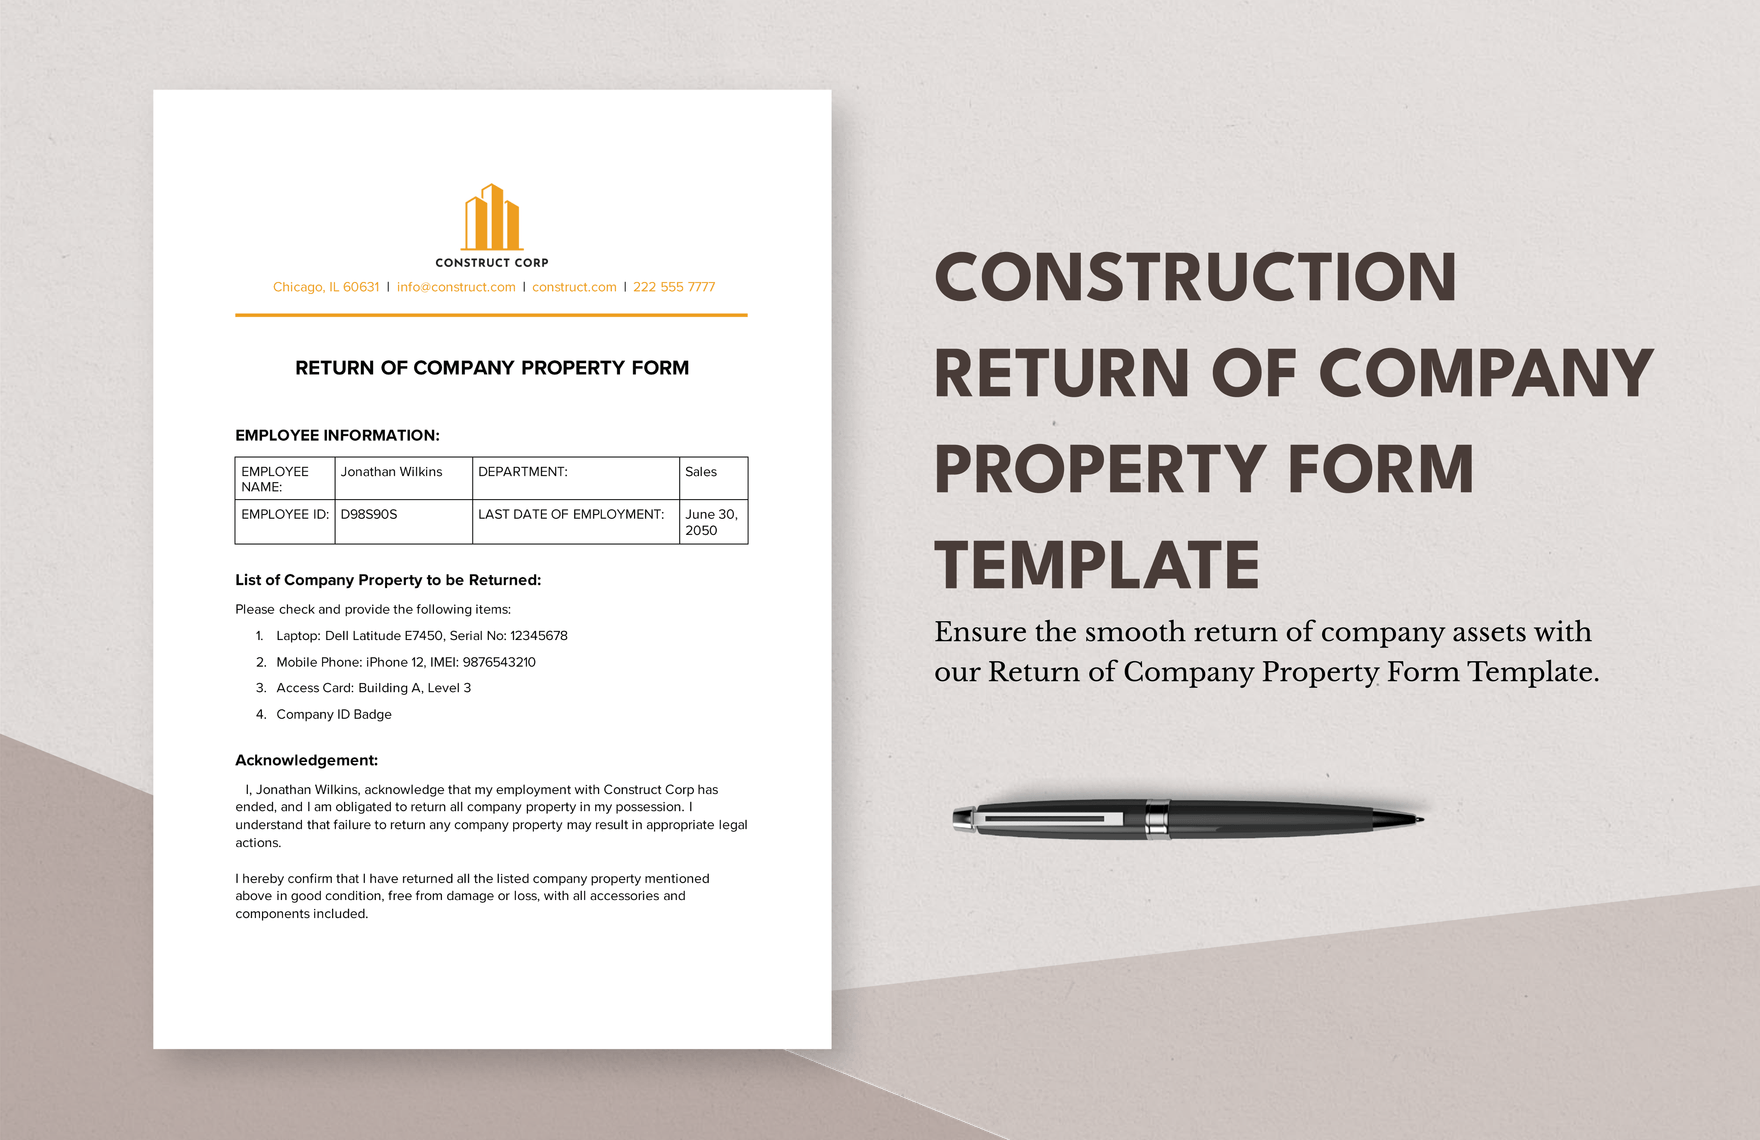 Construction Return of Company Property Form Template